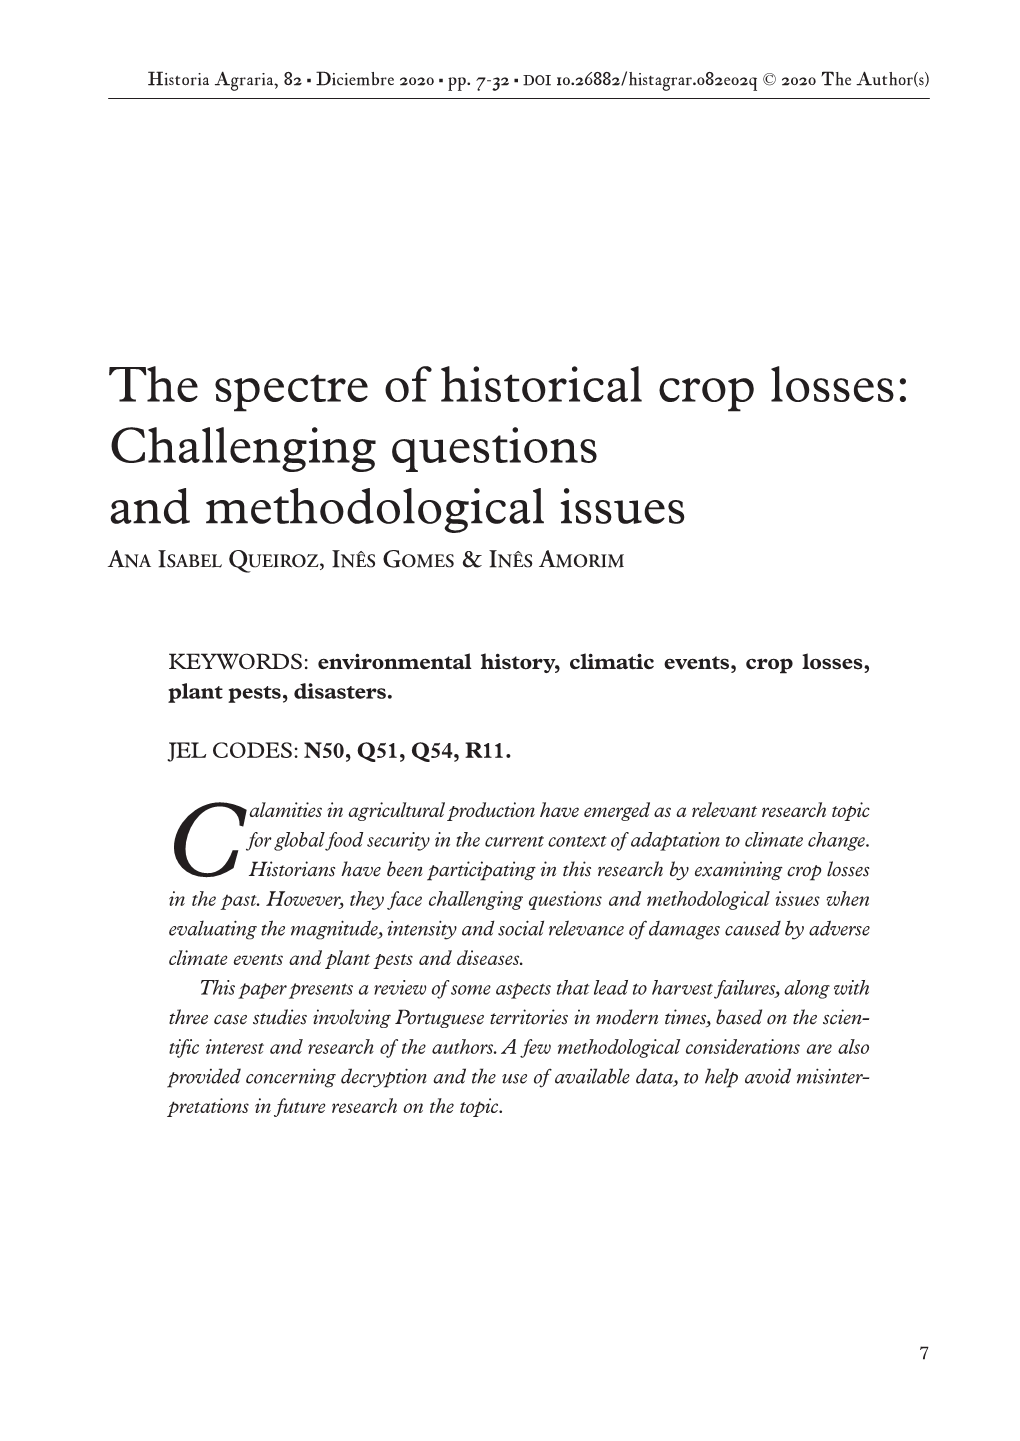 The Spectre of Historical Crop Losses: Challenging Questions and Methodological Issues ANA ISABEL QUEIROZ, INÊS GOMES & INÊS AMORIM